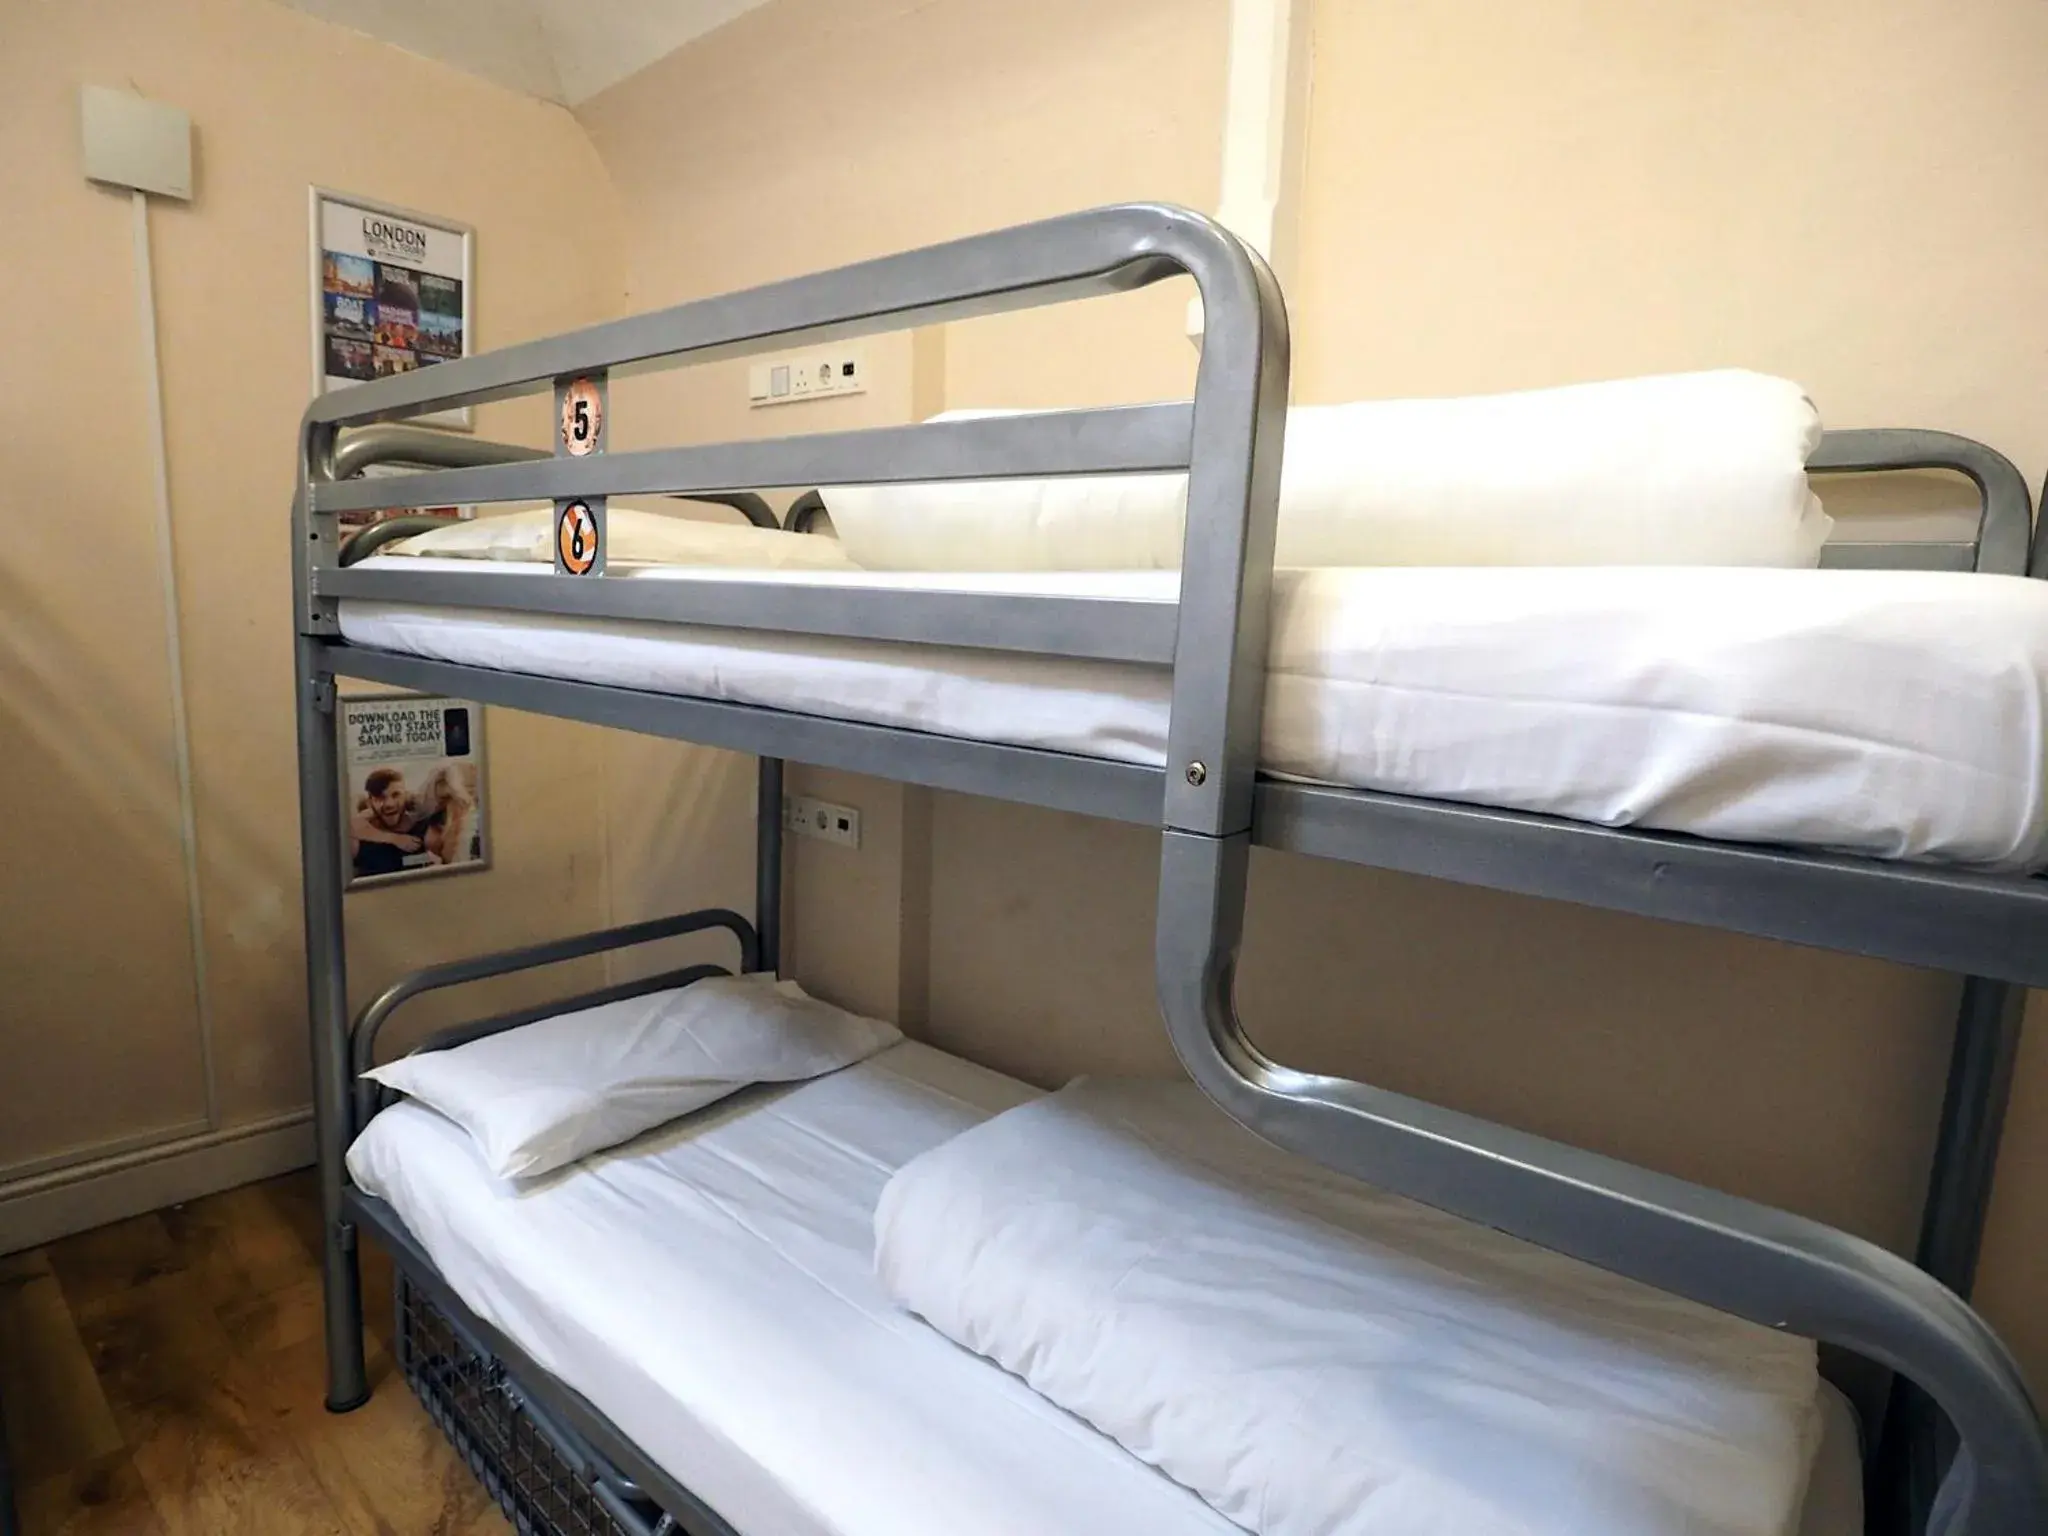 Bed in 4-Bed Mixed Dormitory Room External Shared Bathroom in St Christopher's Edinburgh Original